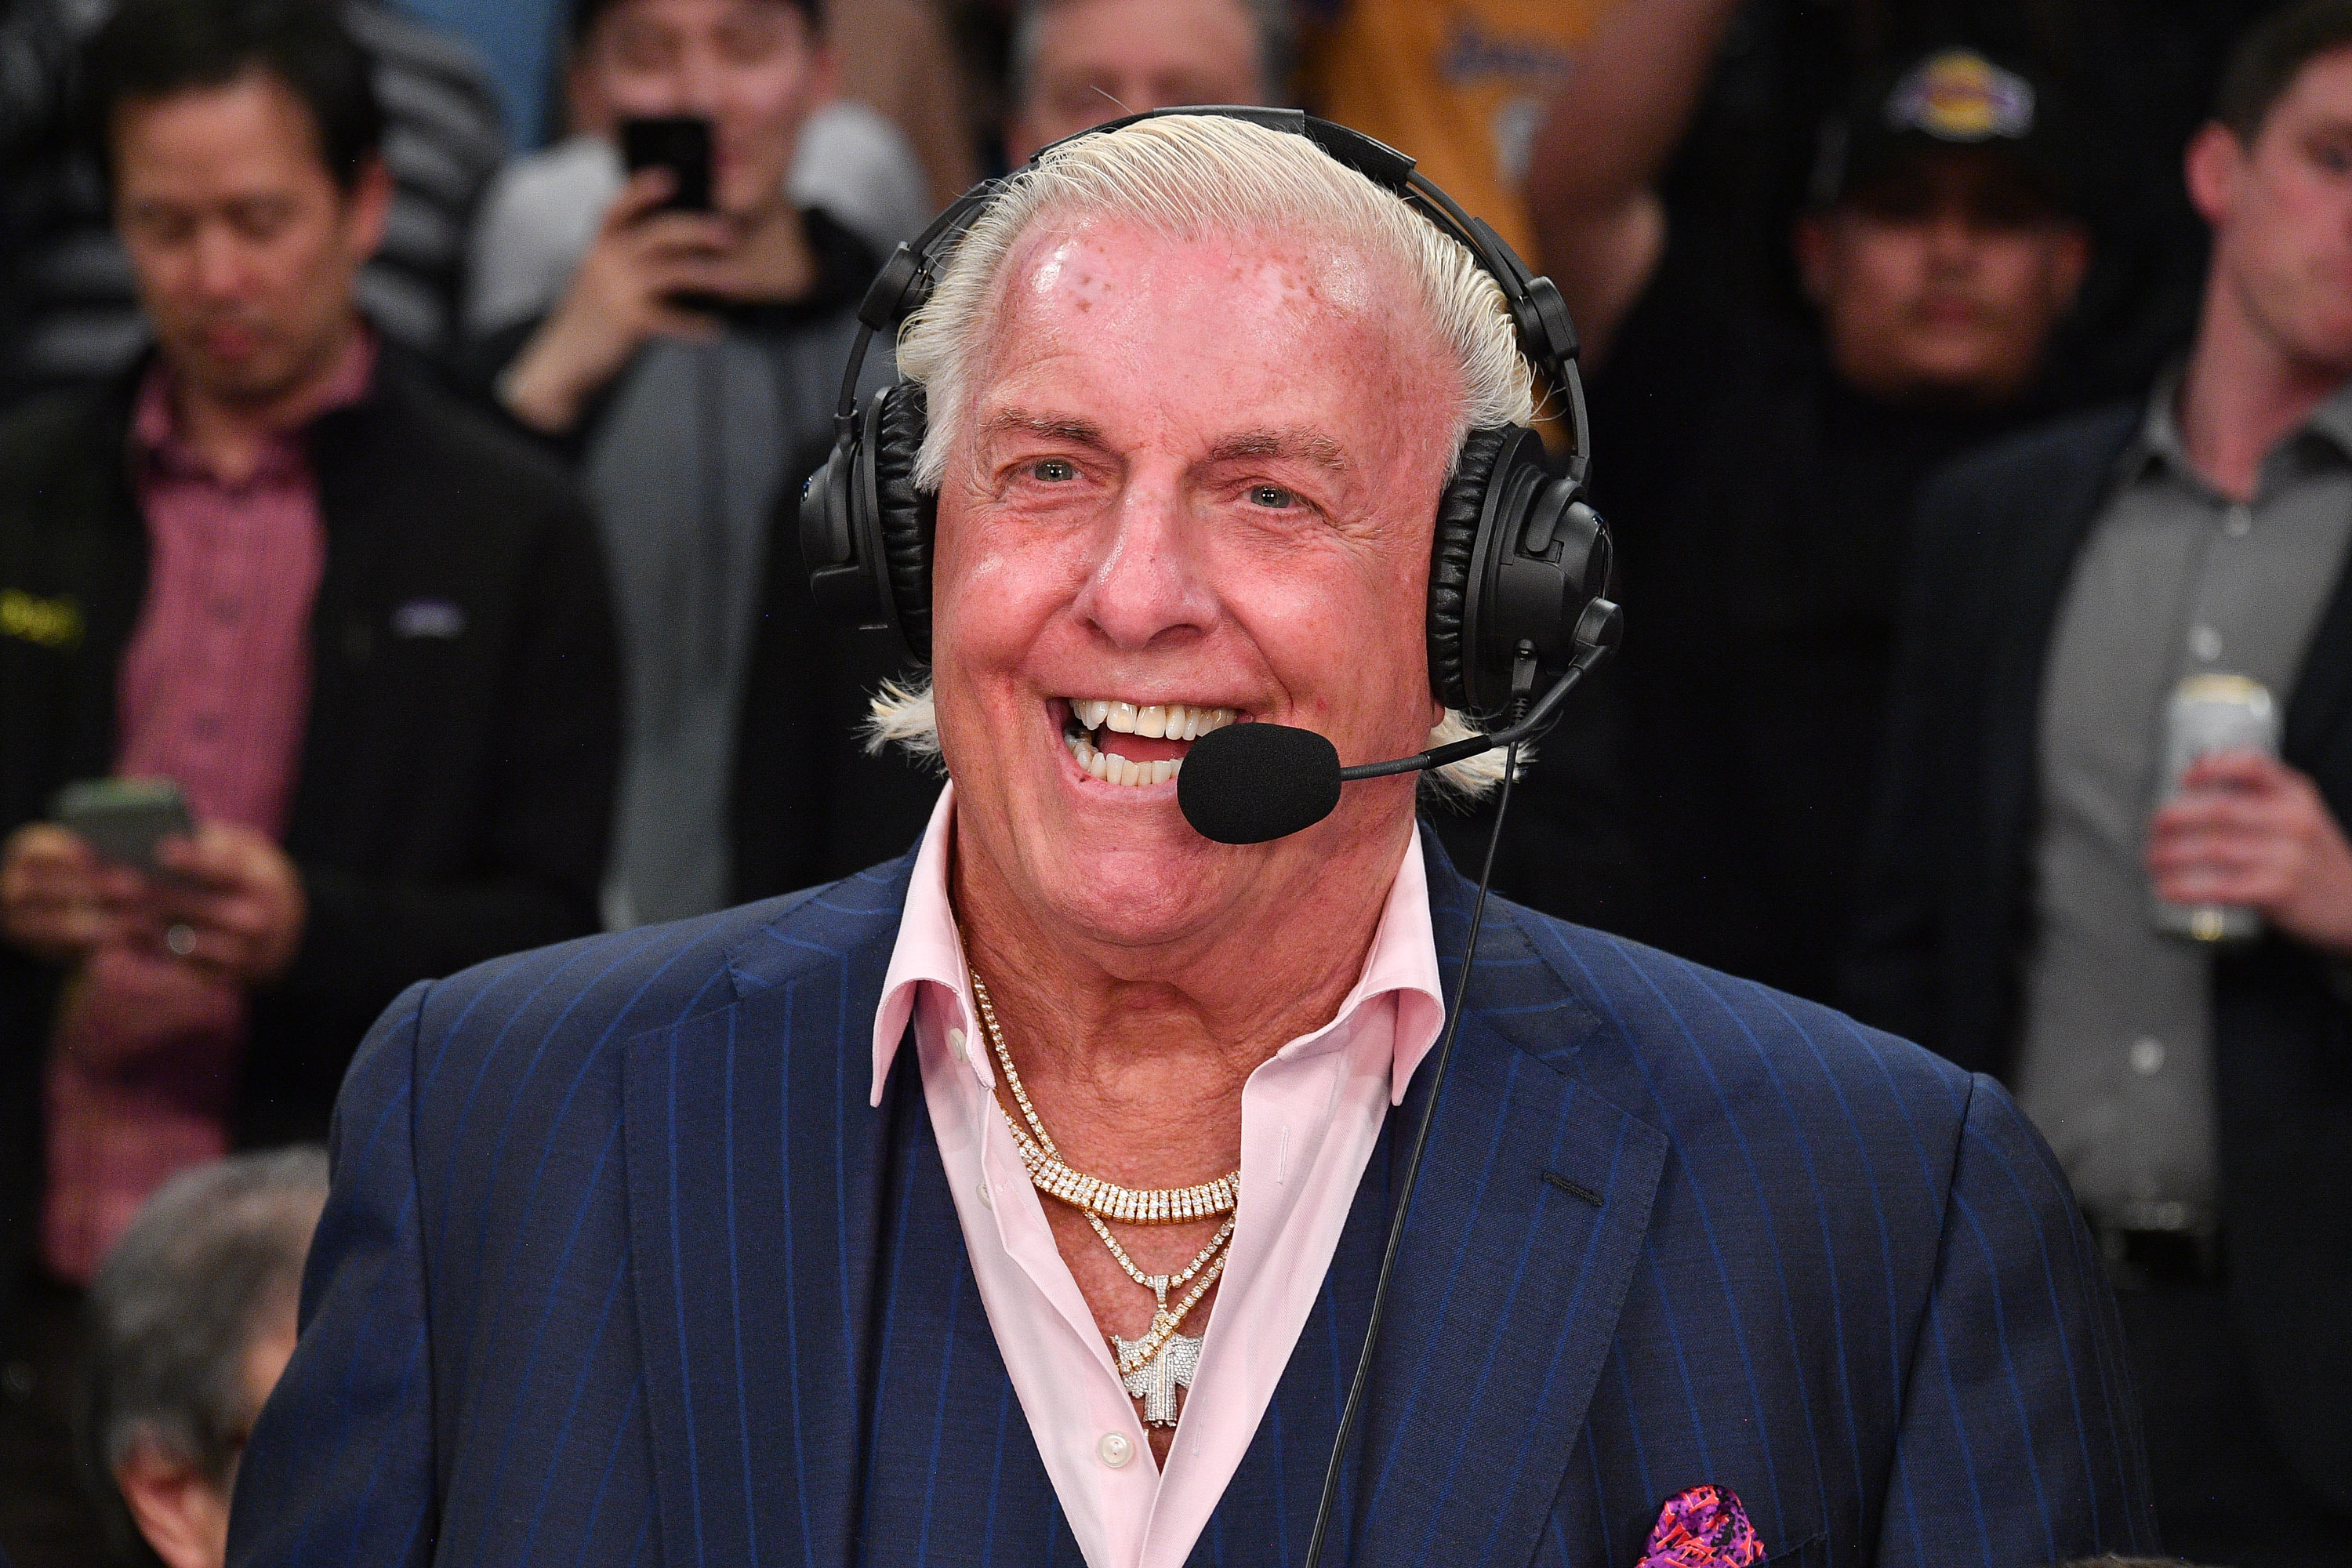 Ric Flair: AEW's Tony Khan Wouldn't Offer Contract Due to WWE Relationship  | Bleacher Report | Latest News, Videos and Highlights